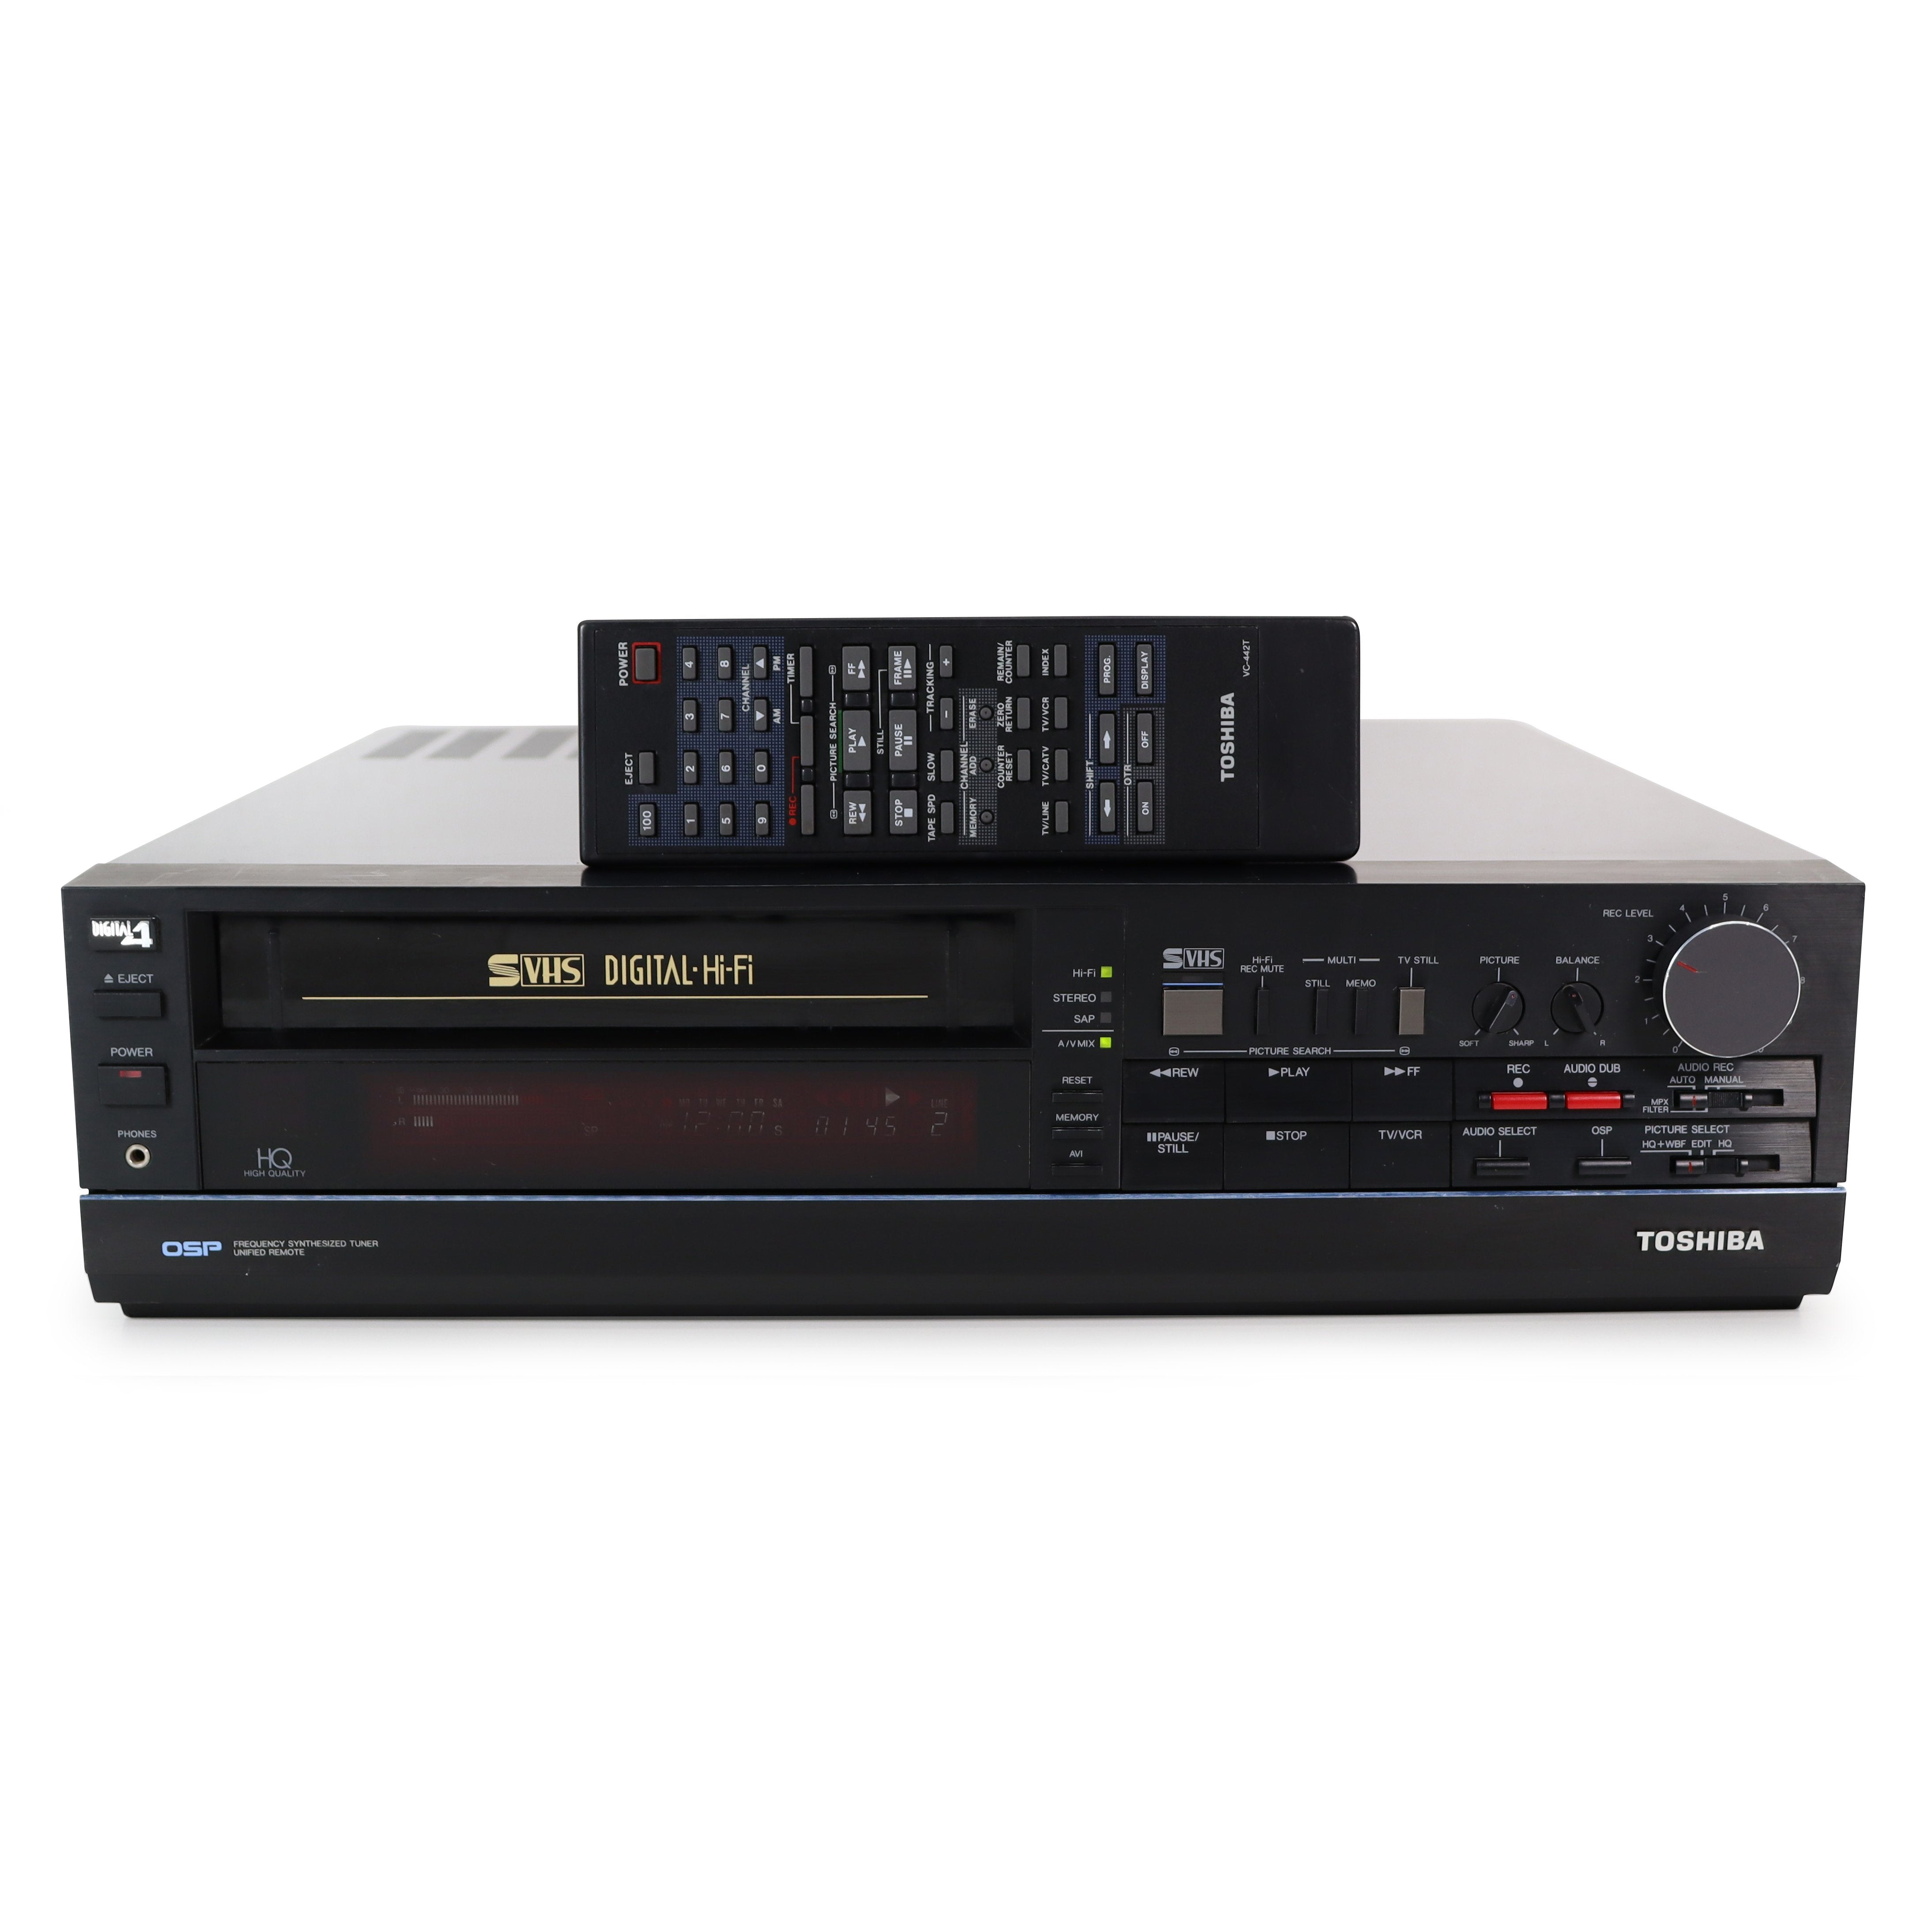 Should you get an S-Video VCR? Understanding Super VHS / SVHS and S-Vi